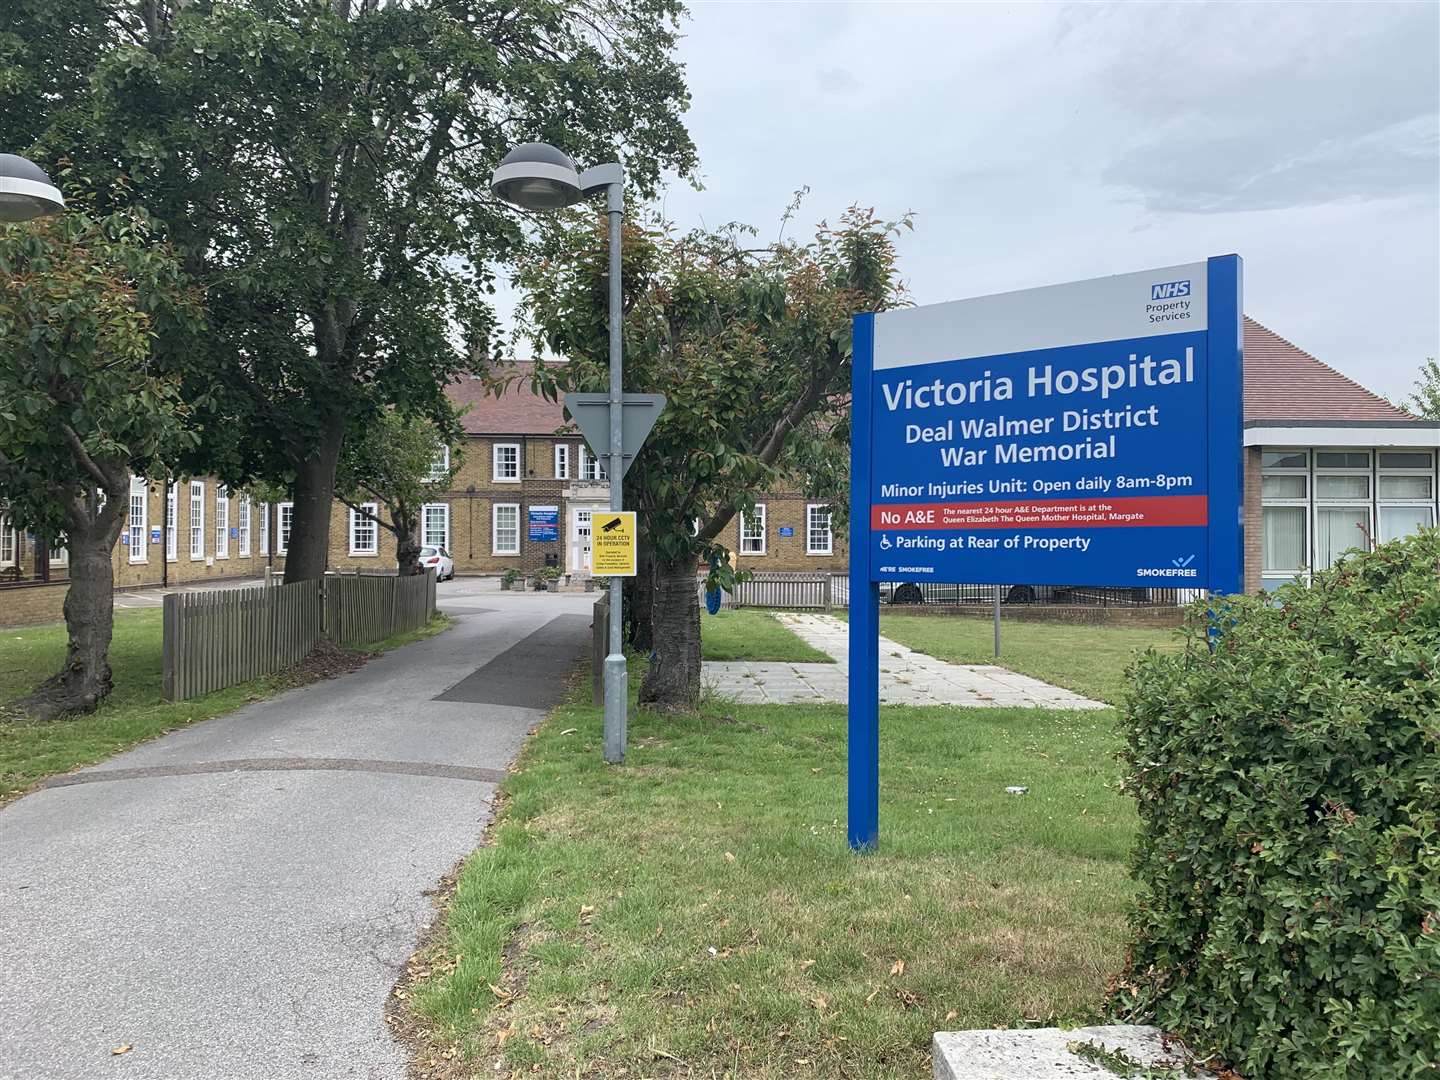 Victoria Hospital in Deal